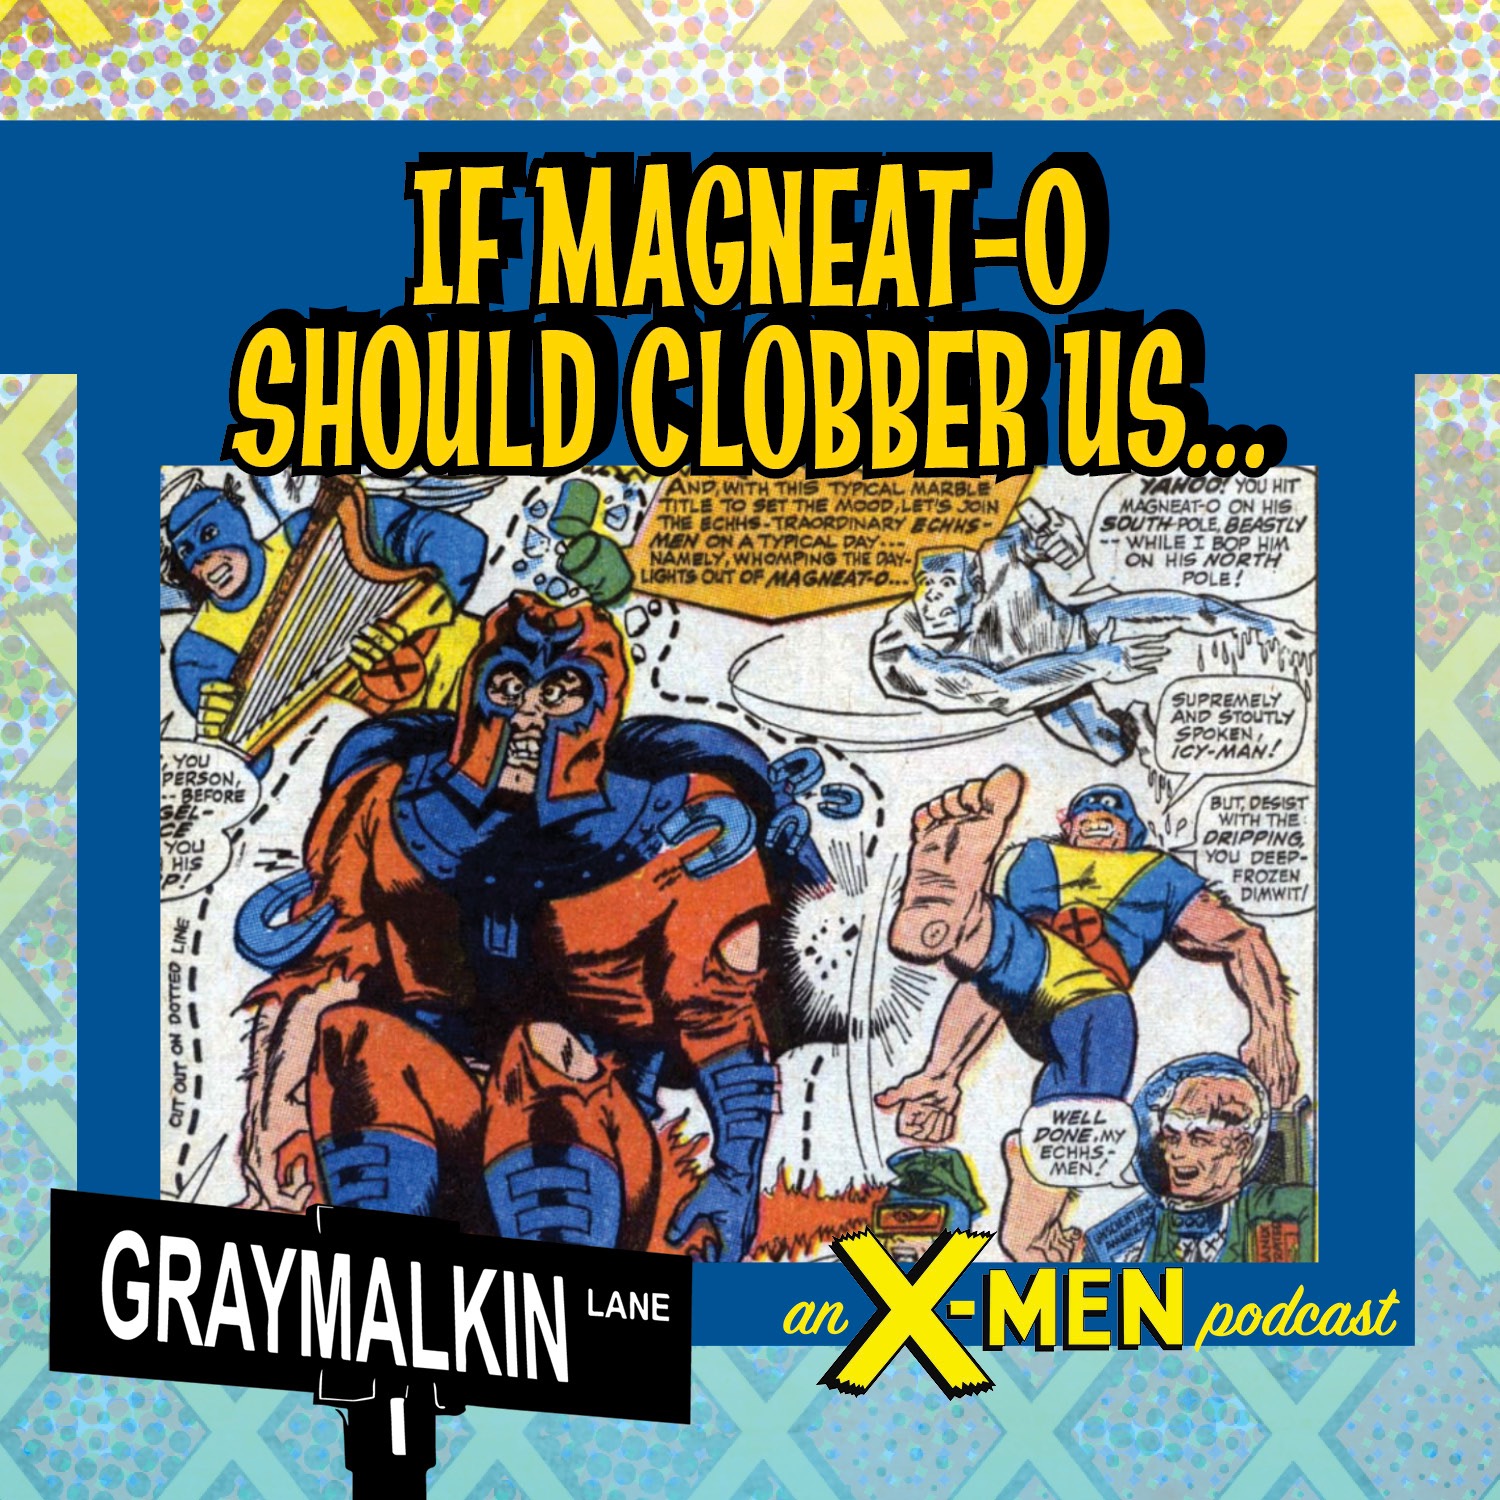 Not Brand Echh #4: If Magneat-O Should Clobber Us...! The Holiday episode! First, it's the Roast of Scott Summers, with hilarious friends! And then a review of Not Brand Echh #4 with the Anderson Fami